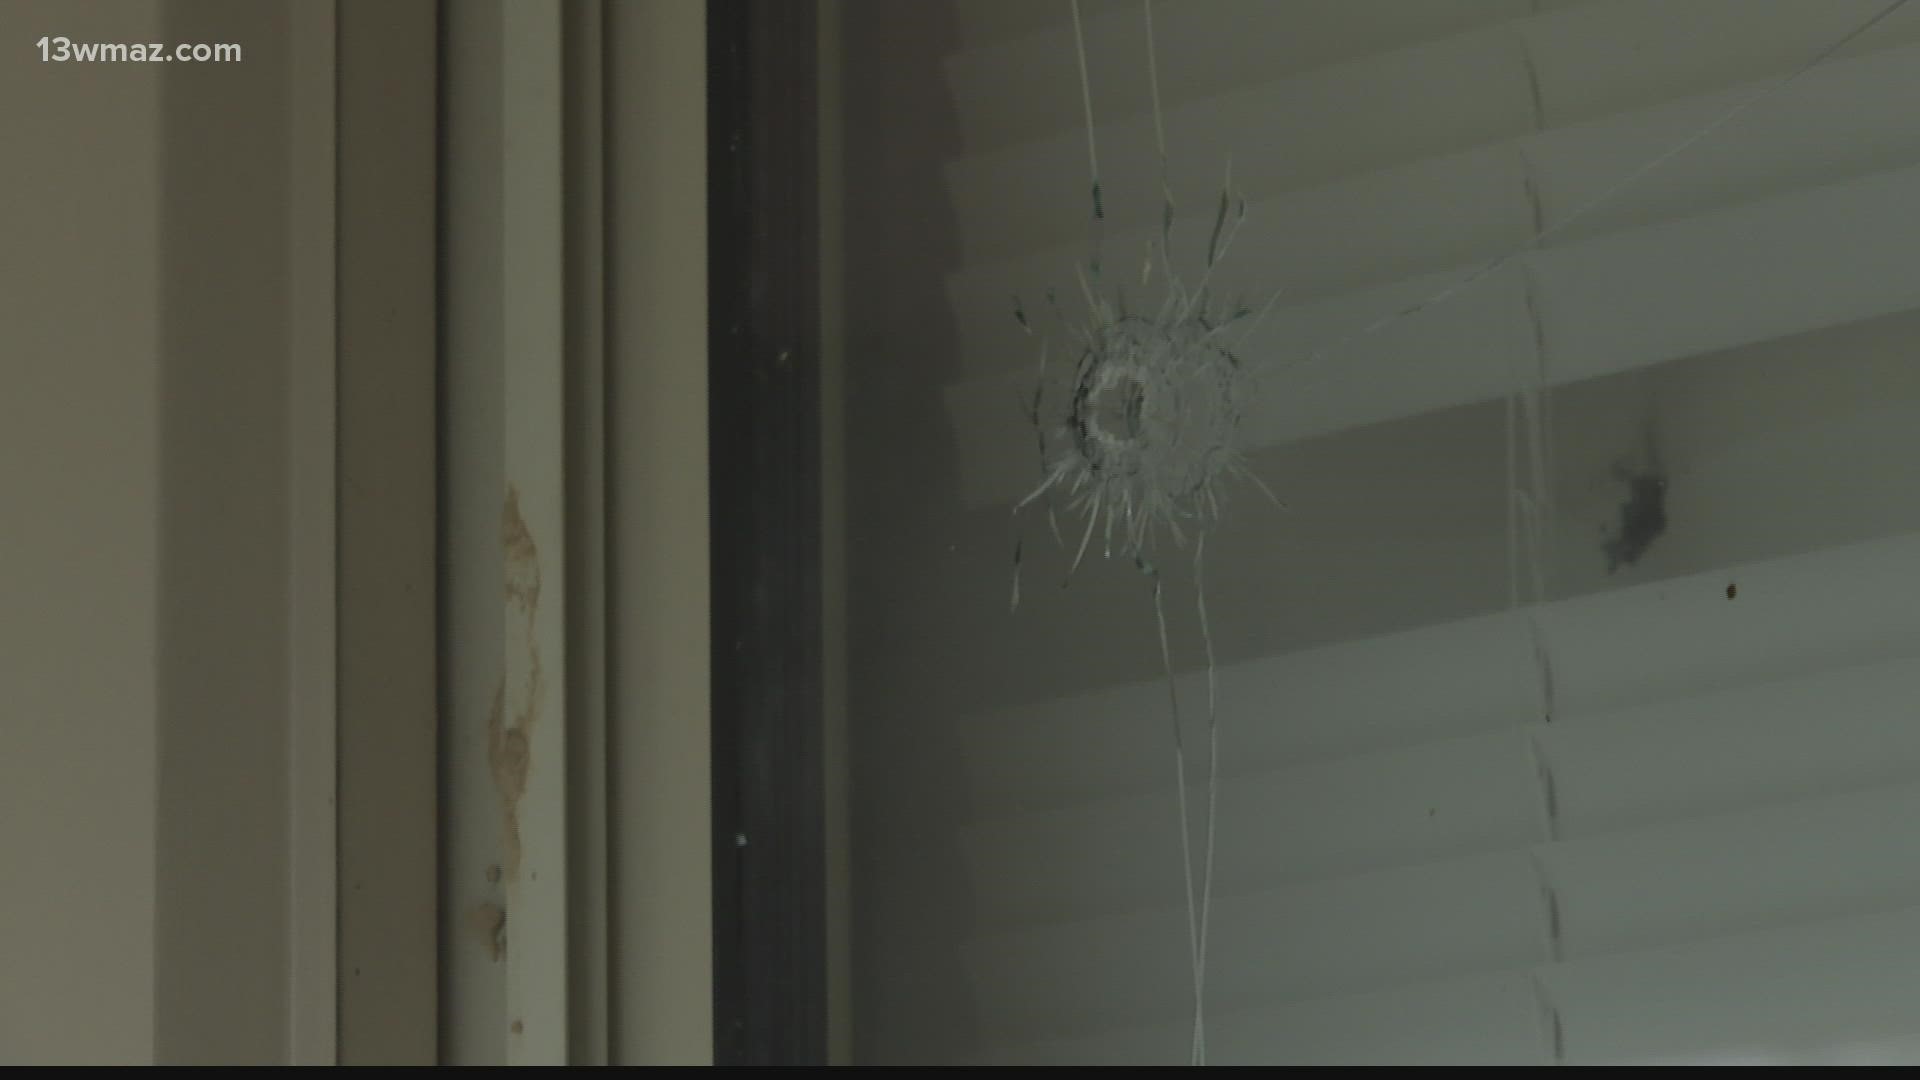 Bibb deputies confirmed to 13WMAZ that at least 20 shots were fired into the home.